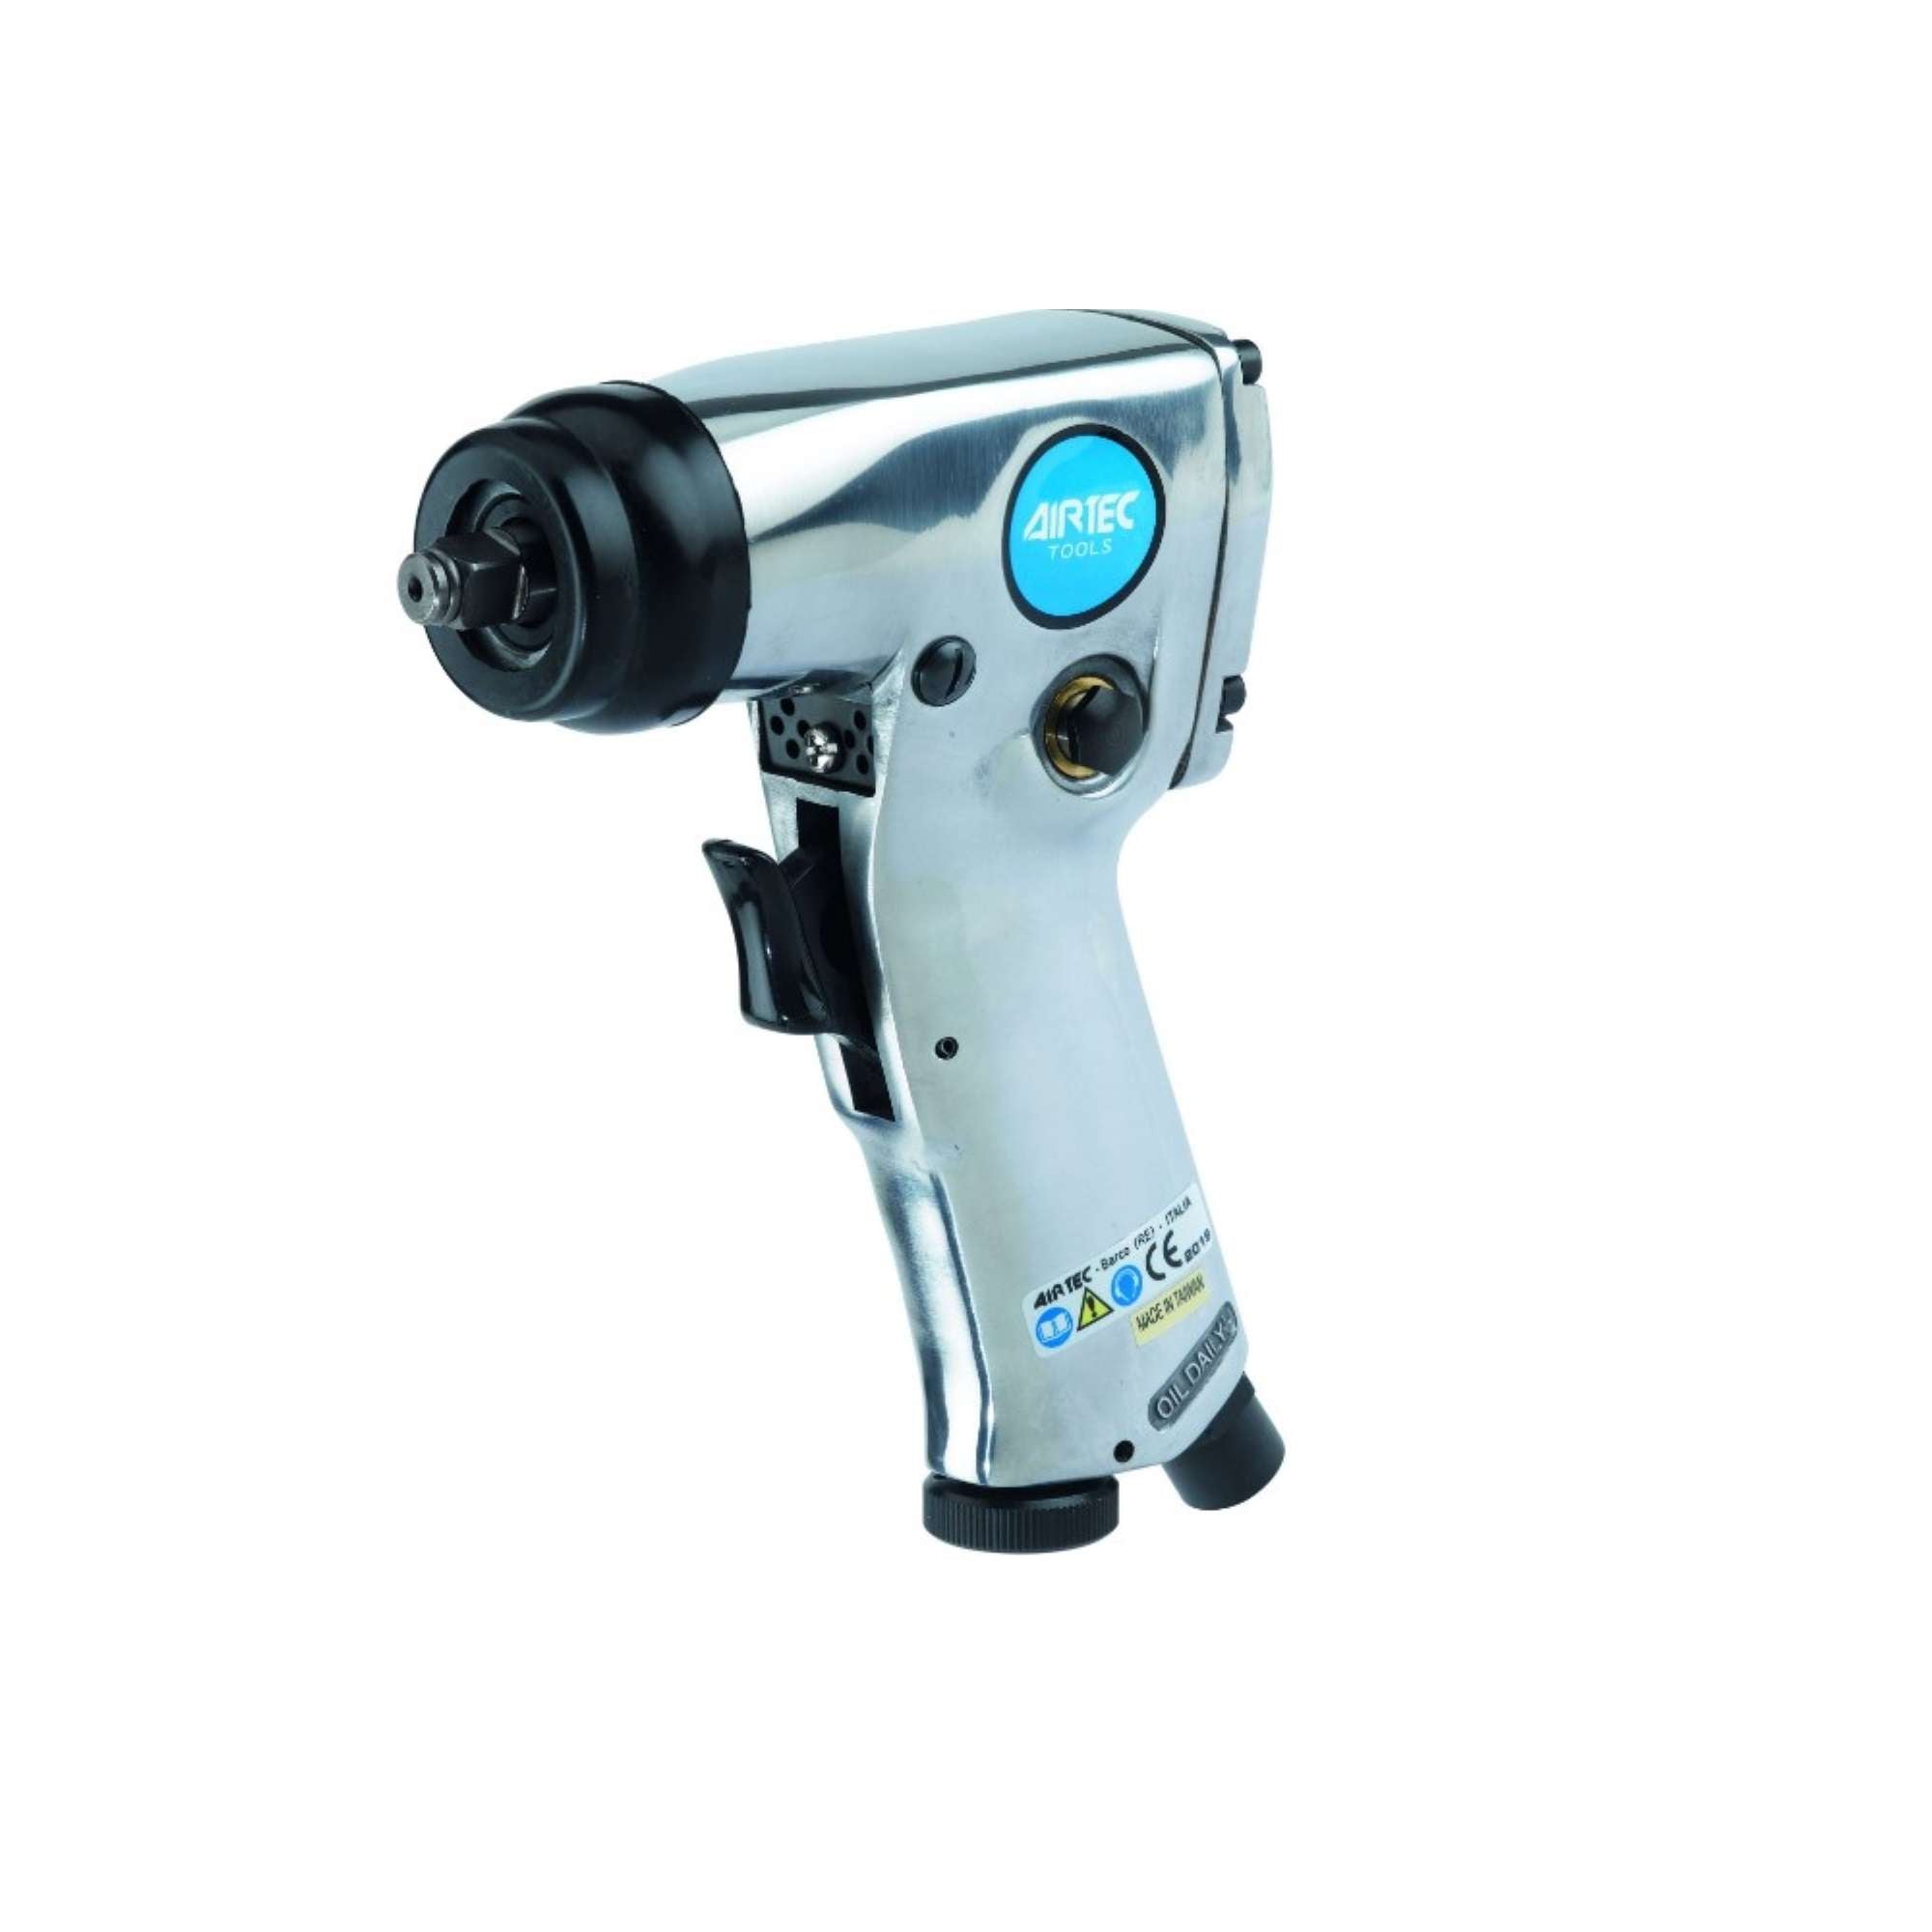 3/8" impact wrench with single hammer system - AirTec 490/P